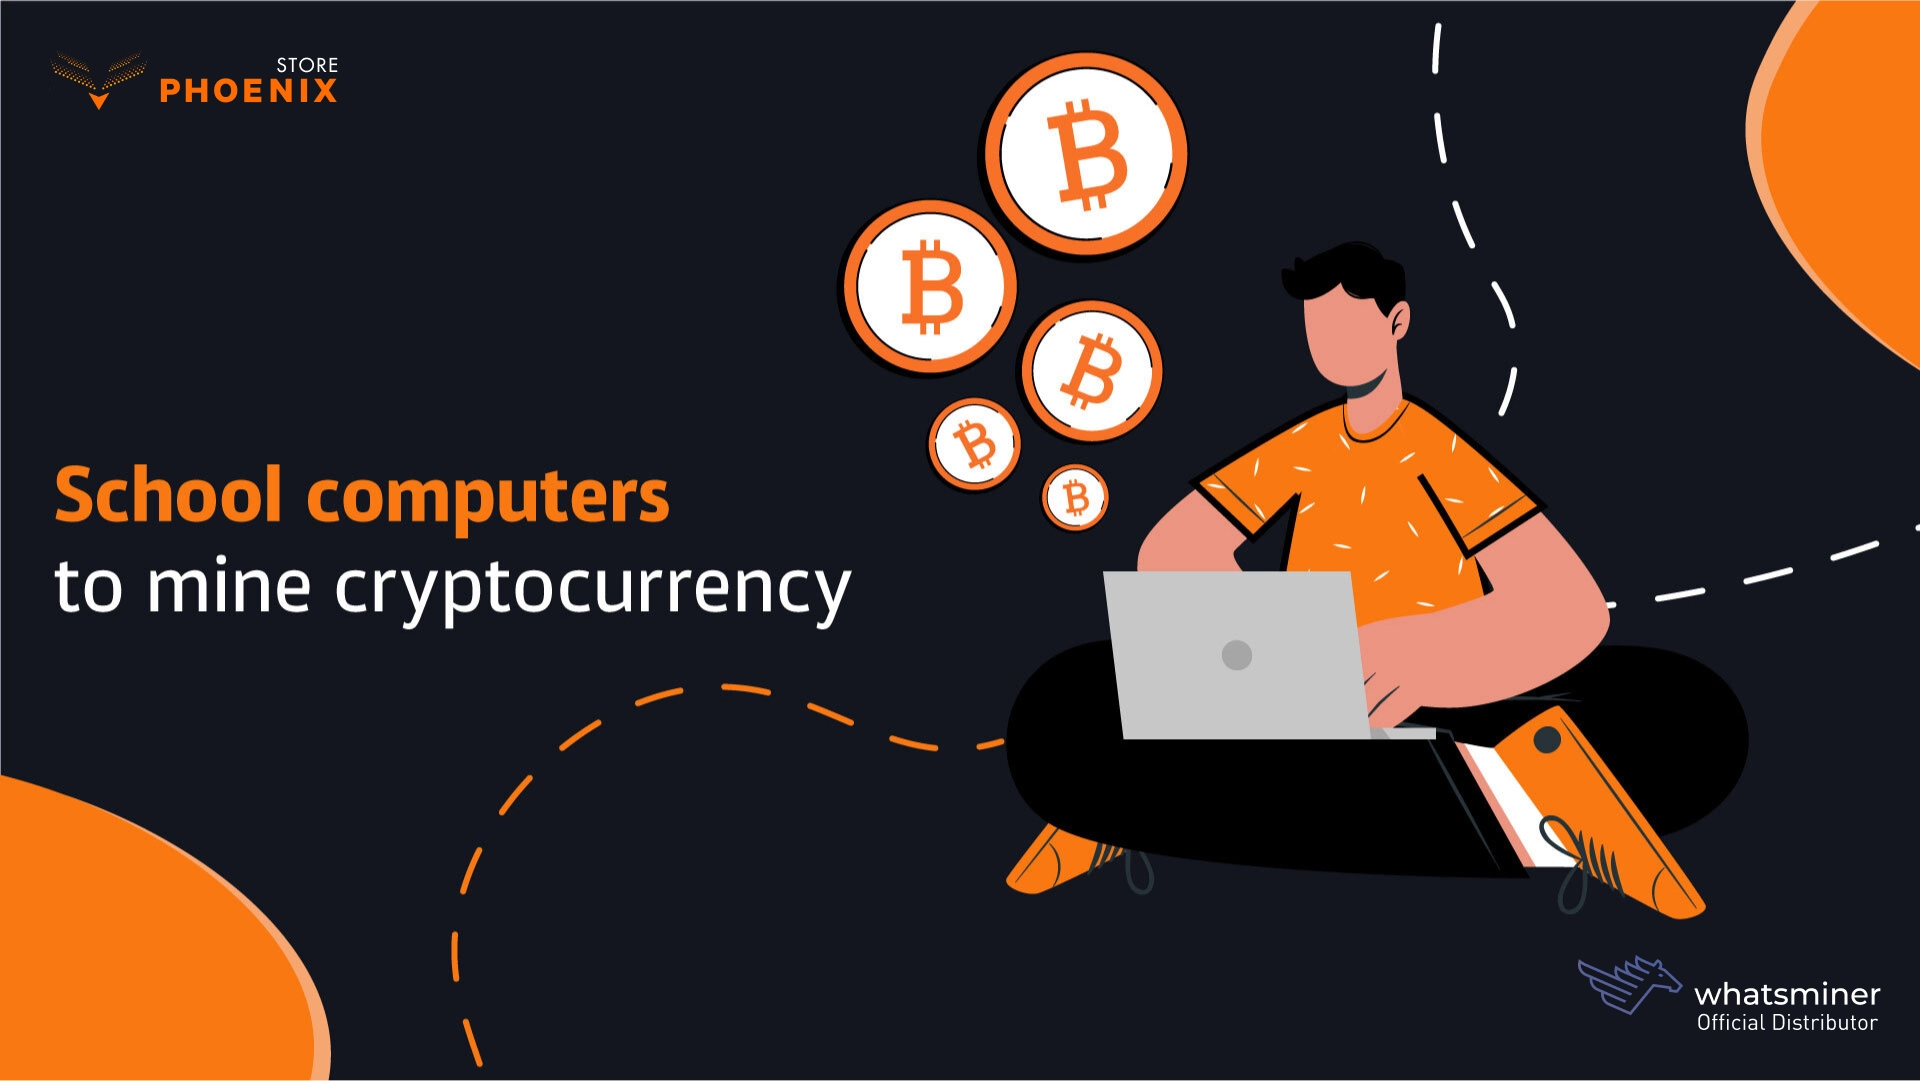 Can We Make Money Using the School Computers to Mine Cryptocurrency?